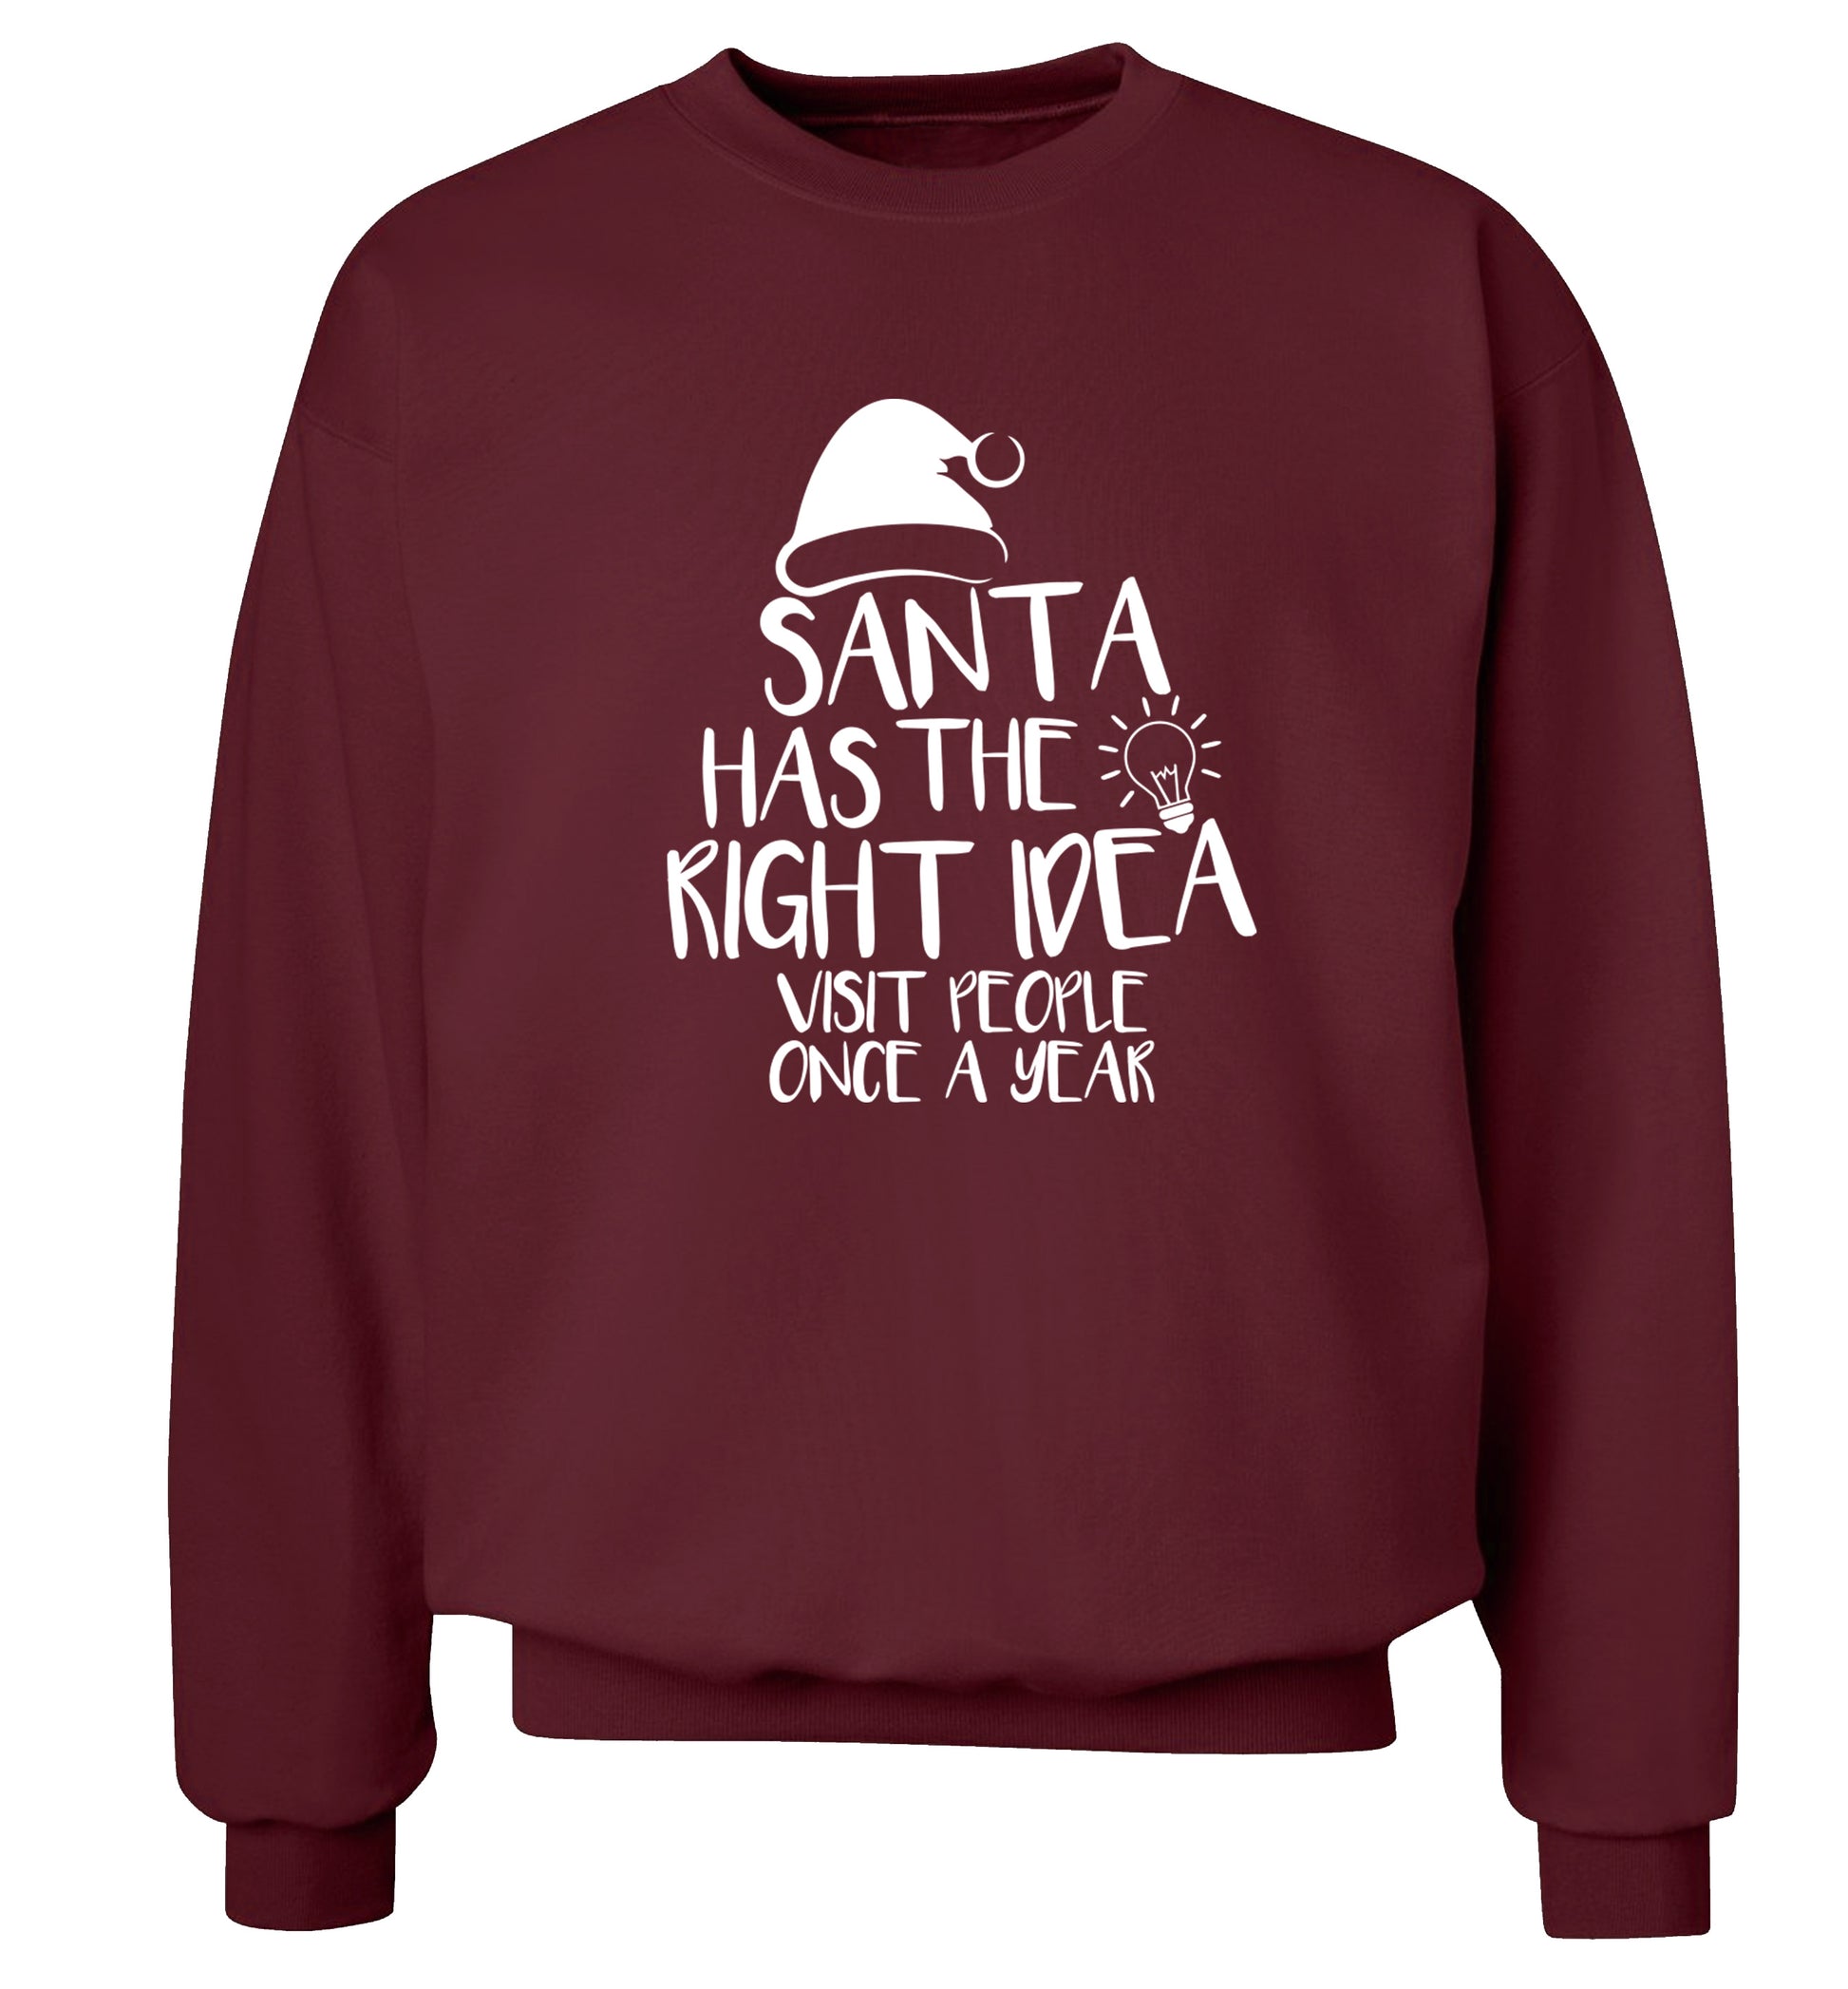 Santa has the right idea visit people once a year Adult's unisex maroon Sweater 2XL